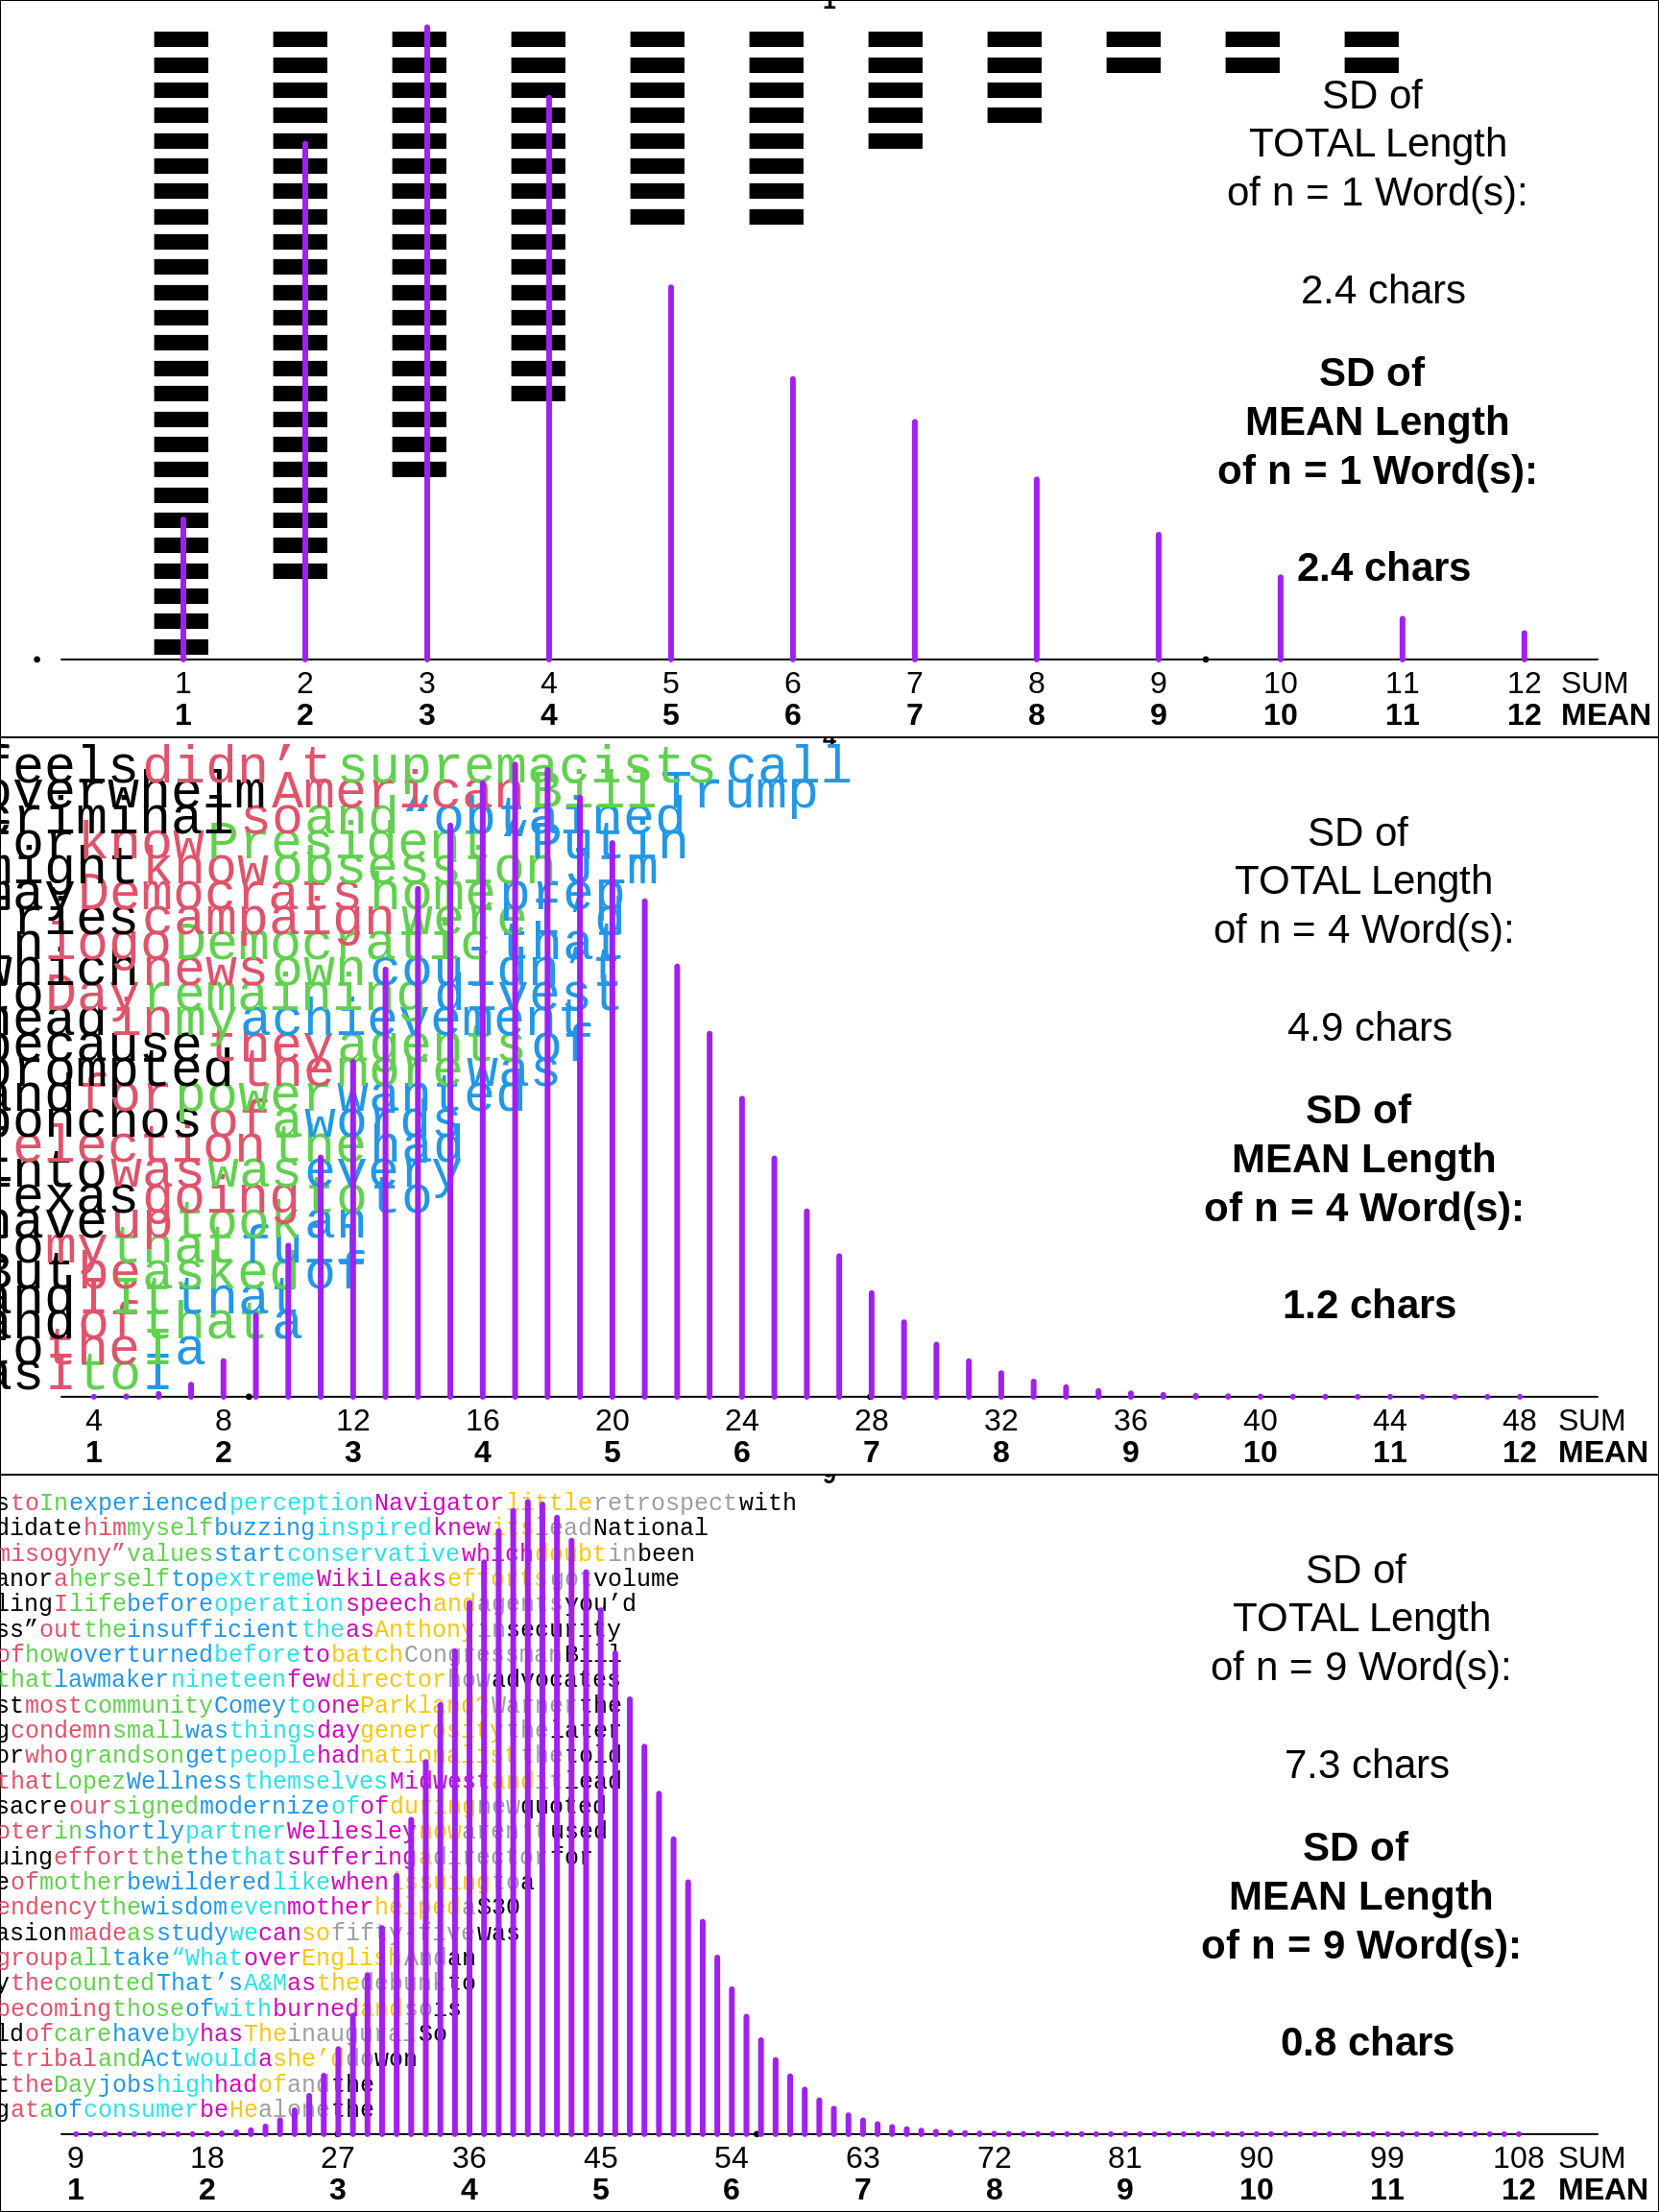 Illustrations of SD's of Sums and Means of n = 1, 4 and 9 independent and identically distributed random variables. Each RV is the length of a randomly selected word from a certain book. [Below, we will compare the mean word length in this book with the mean in abook by a competitor]. The distributions in purple were computed theoretically, using convolutions. Each row shows 1 'realization' of each of the  n random variables, with each word in a different color. The rows are sorted according to the values of the total [or mean] numbers of letters (chars) in the sample of n words. In the panels where n is 4 or 9, the leftmost n-1 characters of the n concatenated words are cropped, but the total/mean length  is correct. The top panel lists the 'per word' variation of all of the words in the book, and its SD, sometimes called the 'unit' variability. You can also think of the length of each unit as the mean of a sample of size n = 1. The second panel shows that to reduce the sampling variation (the SD) of the mean by half, one needs to quadruple the n. The third panel shows that to reduce the sampling variation (the SD) to 1/3, one needs to multiply the n by 9. Note, in passing, that at $n$ = 9, via the Central Limit Theorem, and the fact that the original distribution is 'CLT friendly' (the mode is not at either extreme, and the tails don't extend indefinitely), the shape of the sampling distribution is already close to Gaussian.